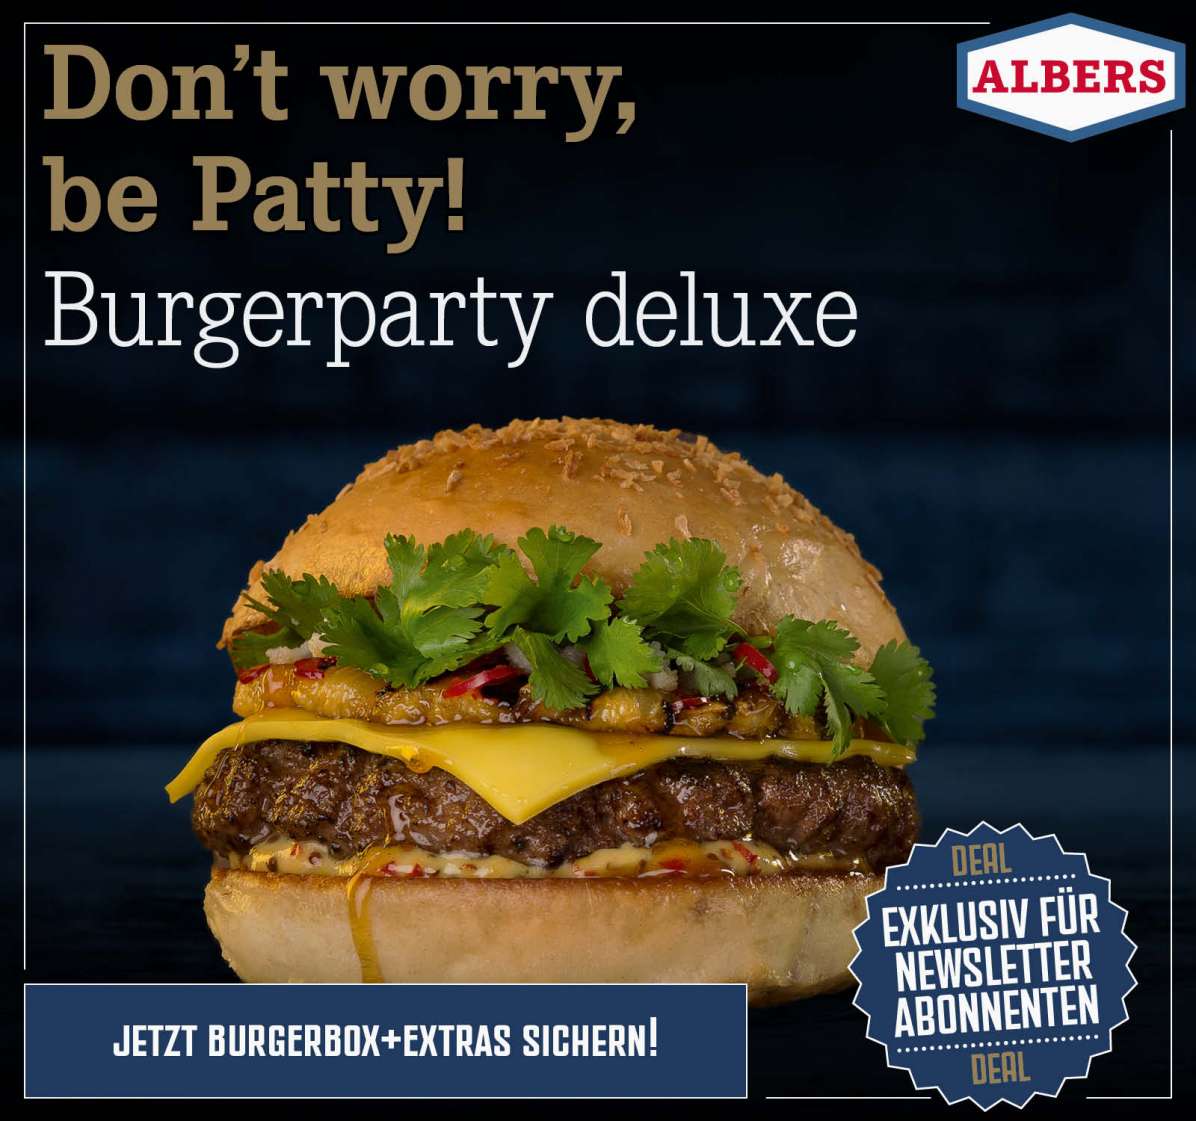 Don’t worry, be Patty! Burgerparty deluxe